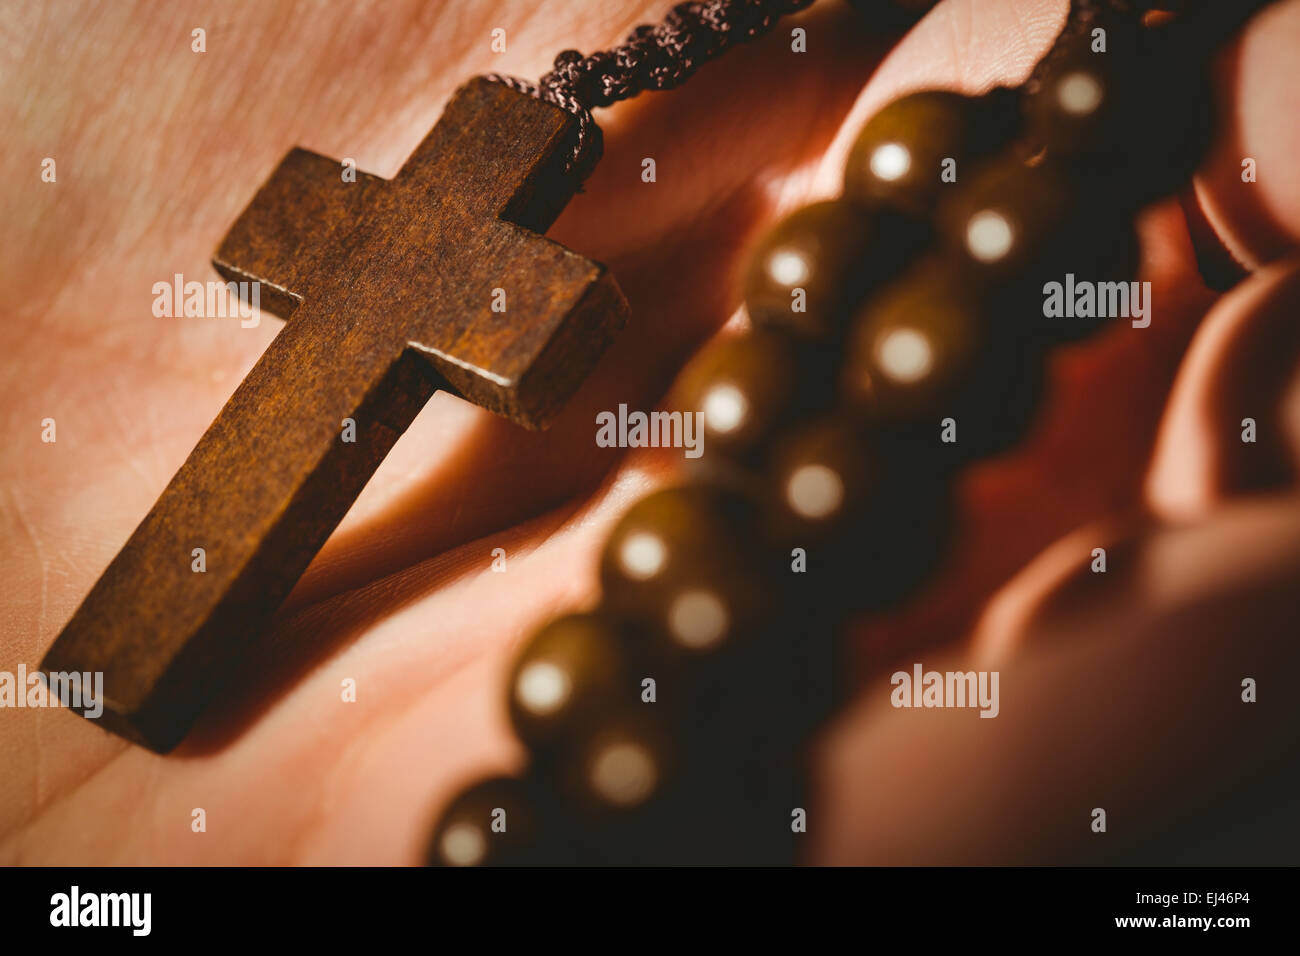 Hand holding wooden rosary beads Stock Photo